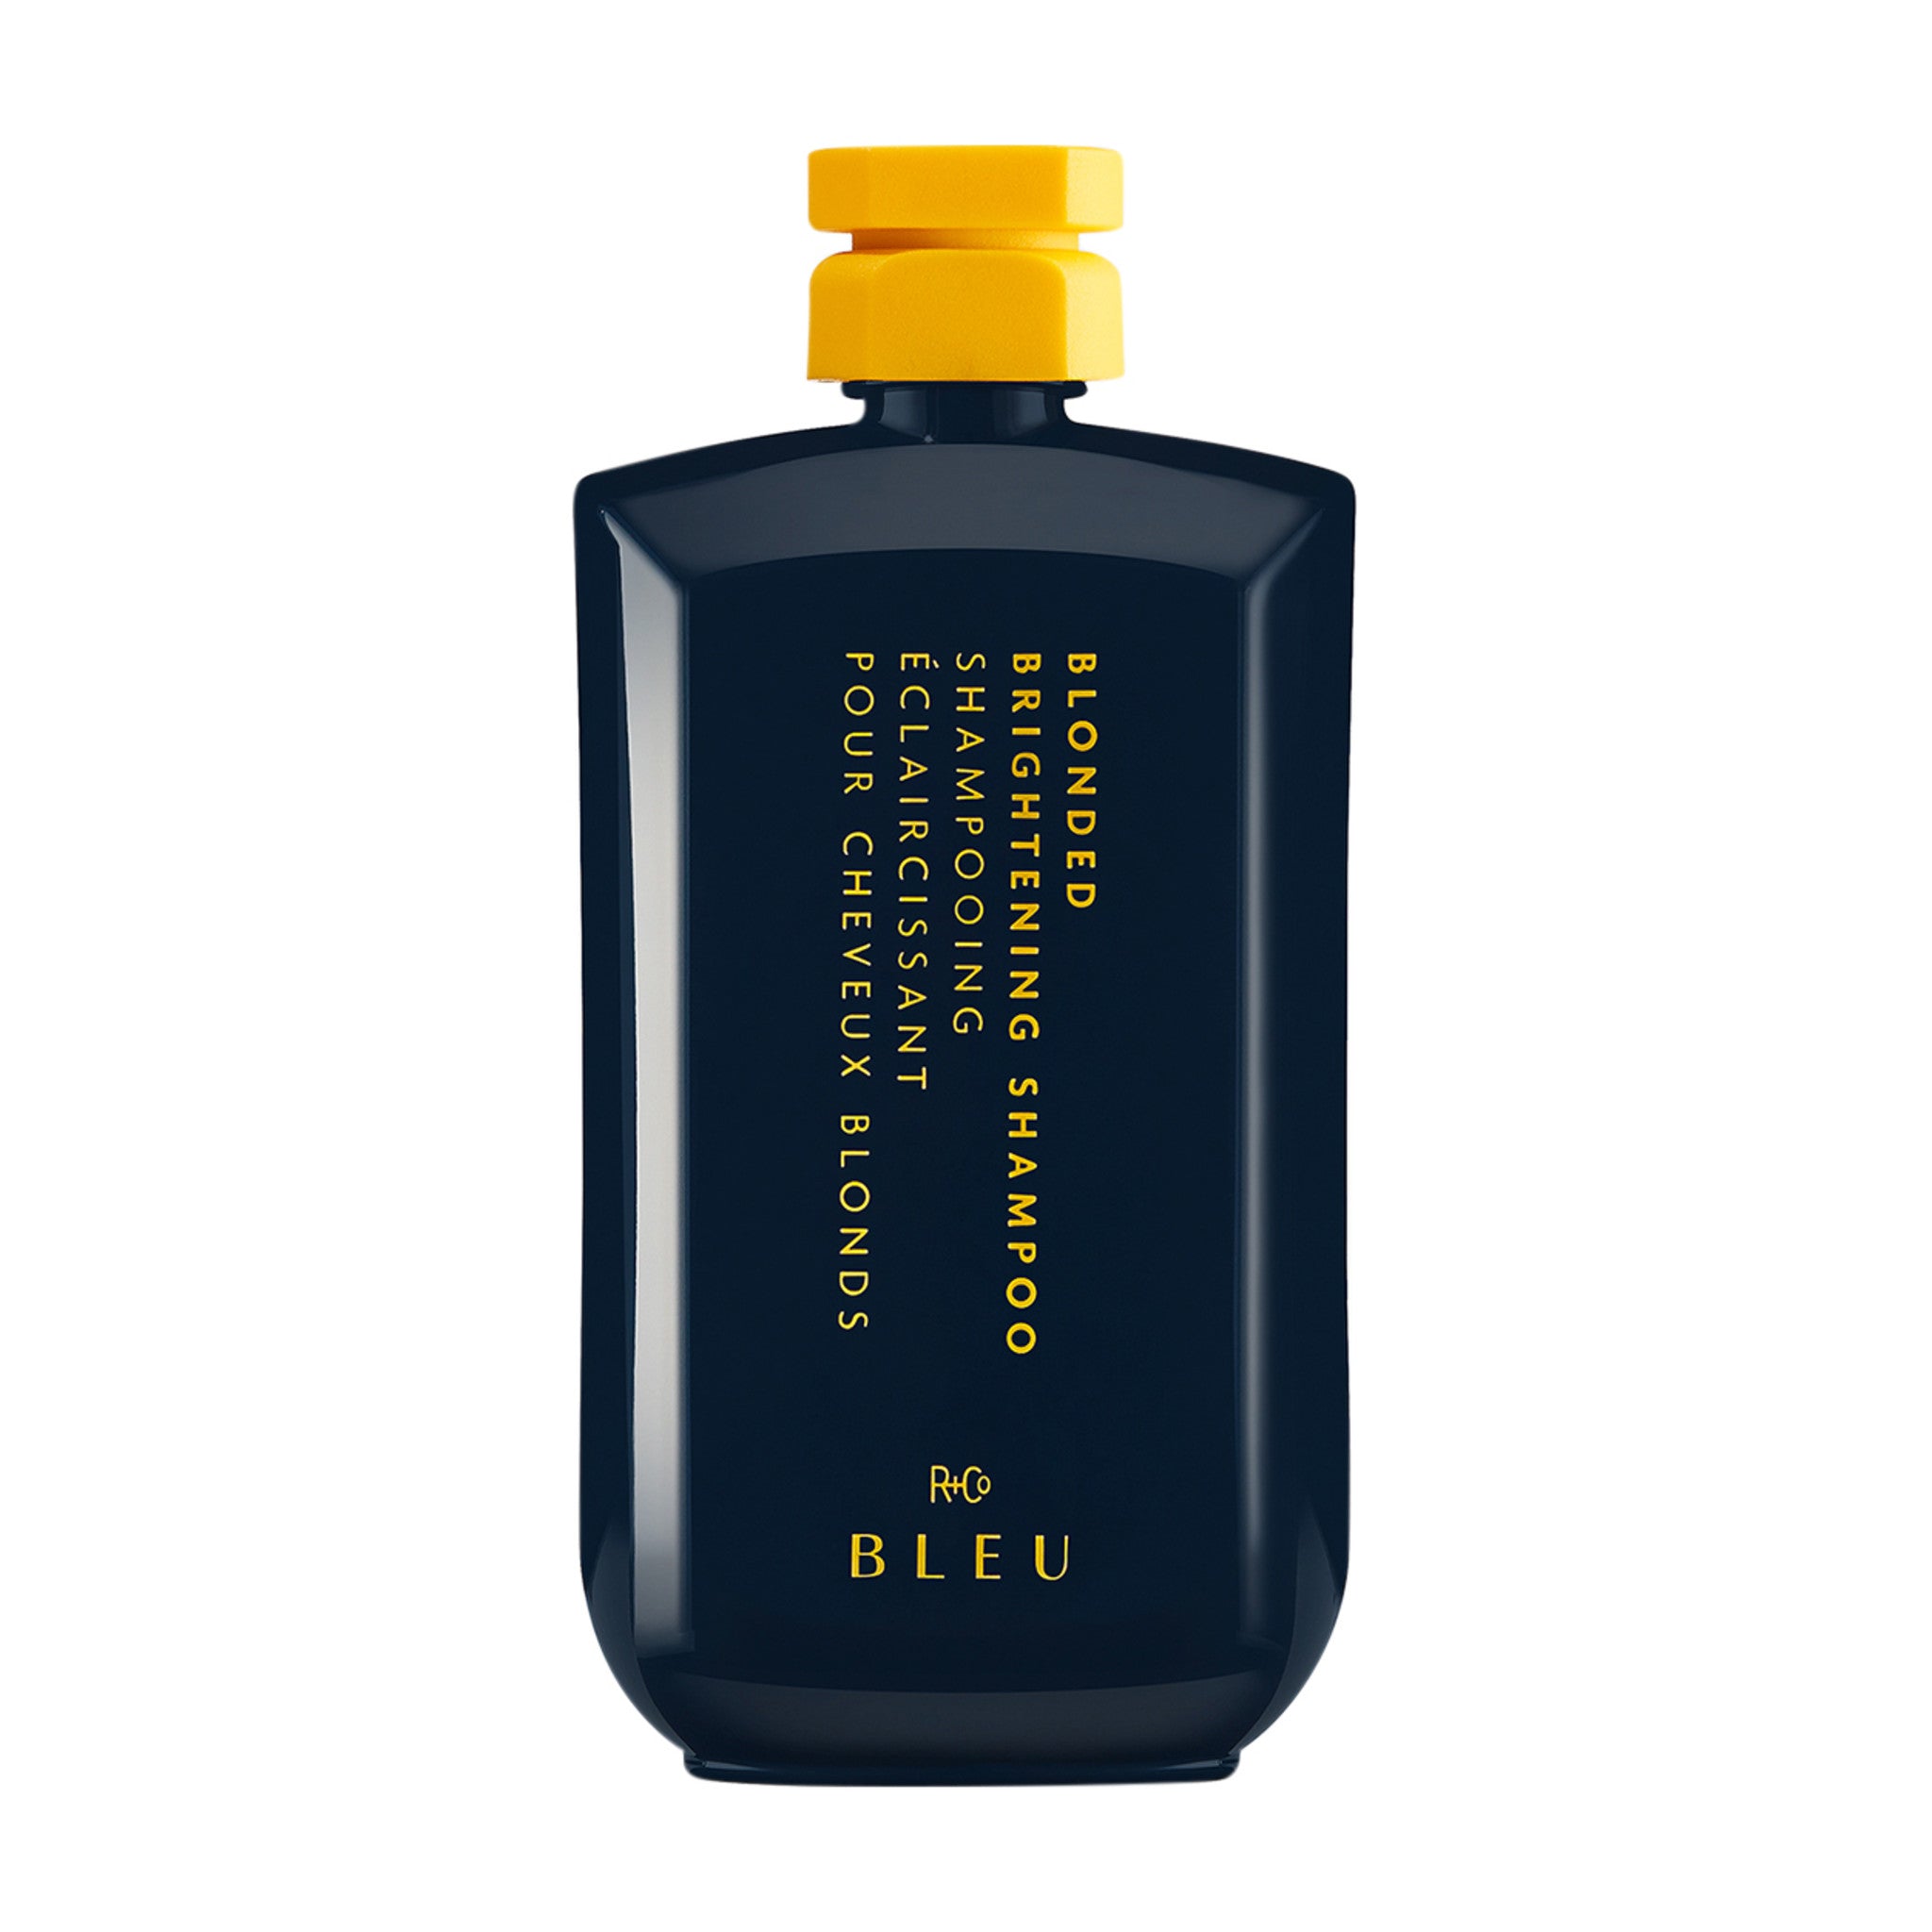 R+Co Bleu Blonded Brightening Shampoo Size variant: main image. This product is for blonde hair